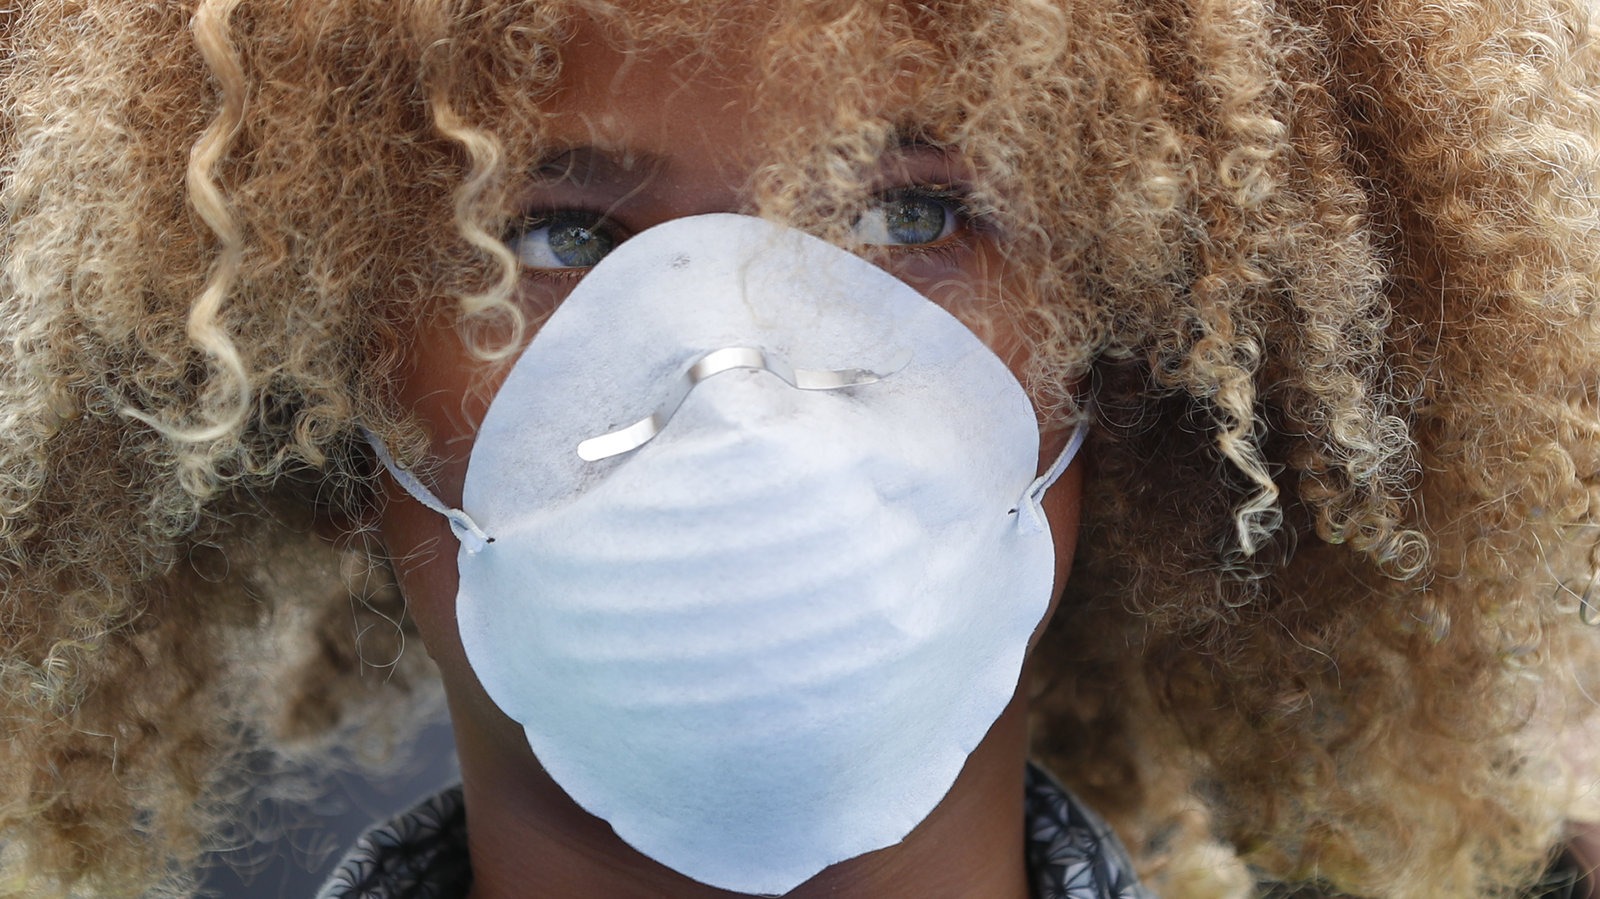 Levi Draheim, 11, wears a dust mask as he participates in a demonstration in Miami in July 2019. A lawsuit filed by him and other young people urging action against climate change was thrown out by a federal appeals court Friday, Jan. 17, 2020. Wilfredo Lee/AP